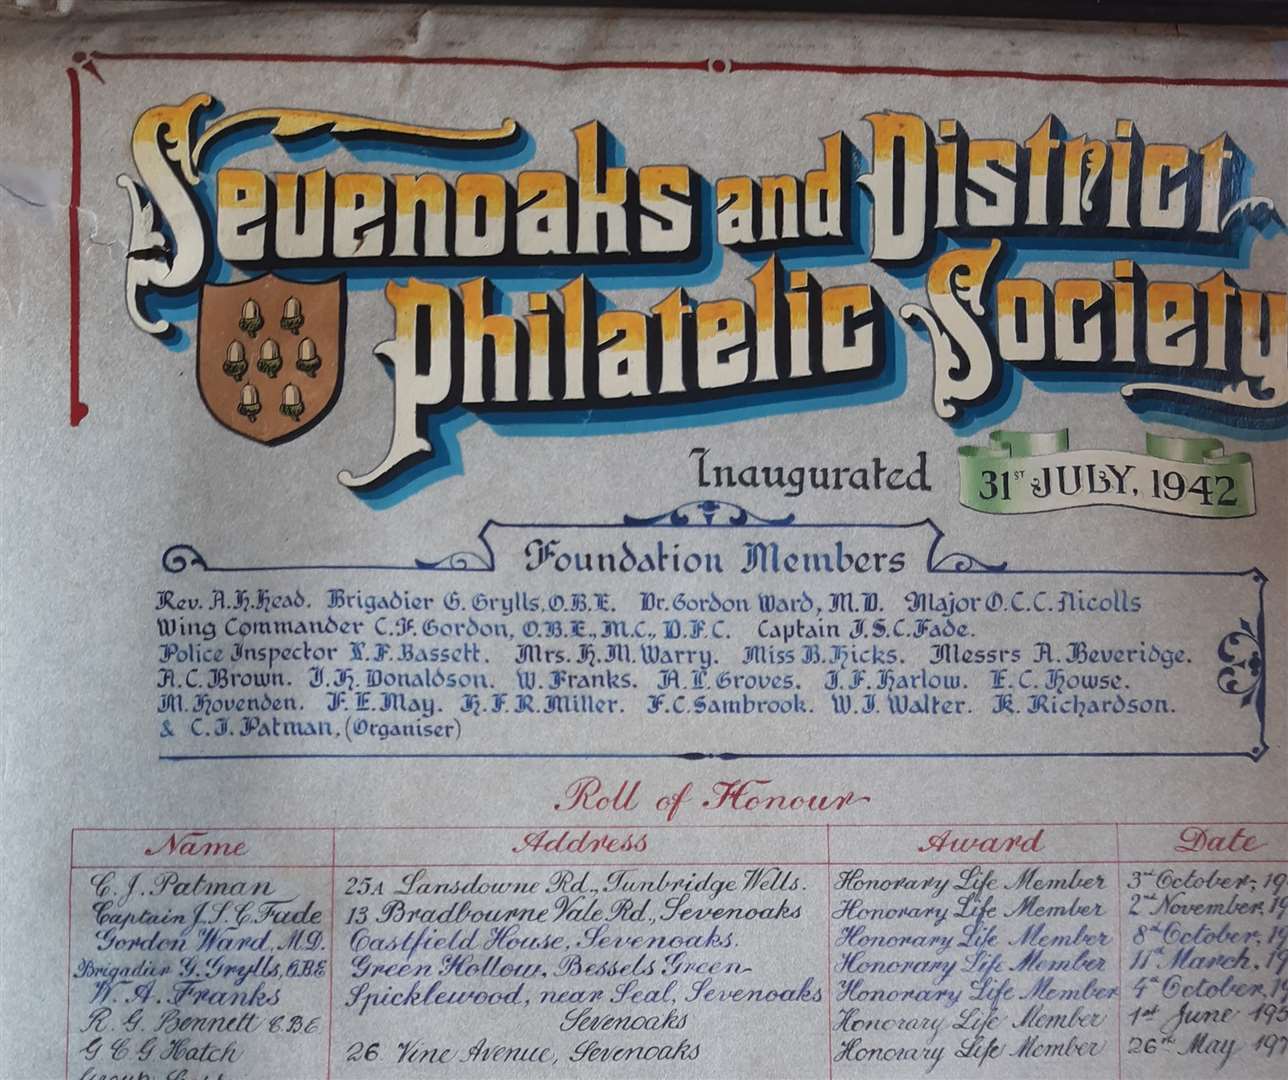 The foundation scroll of the Sevenoaks and District Philatelic Society, from 1942